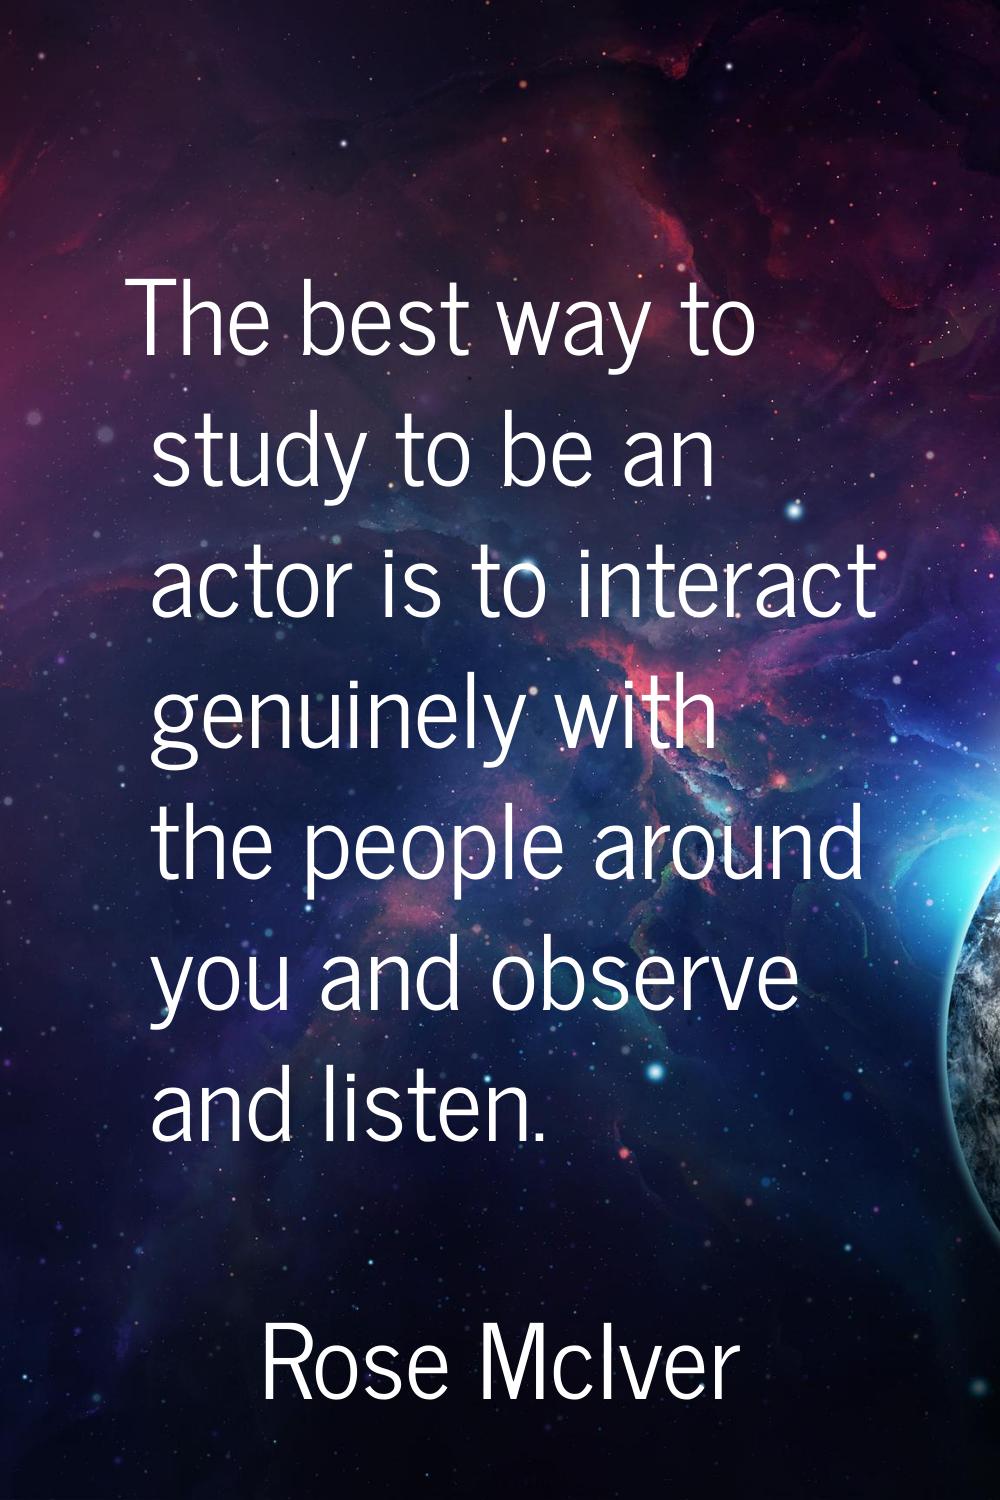 The best way to study to be an actor is to interact genuinely with the people around you and observ